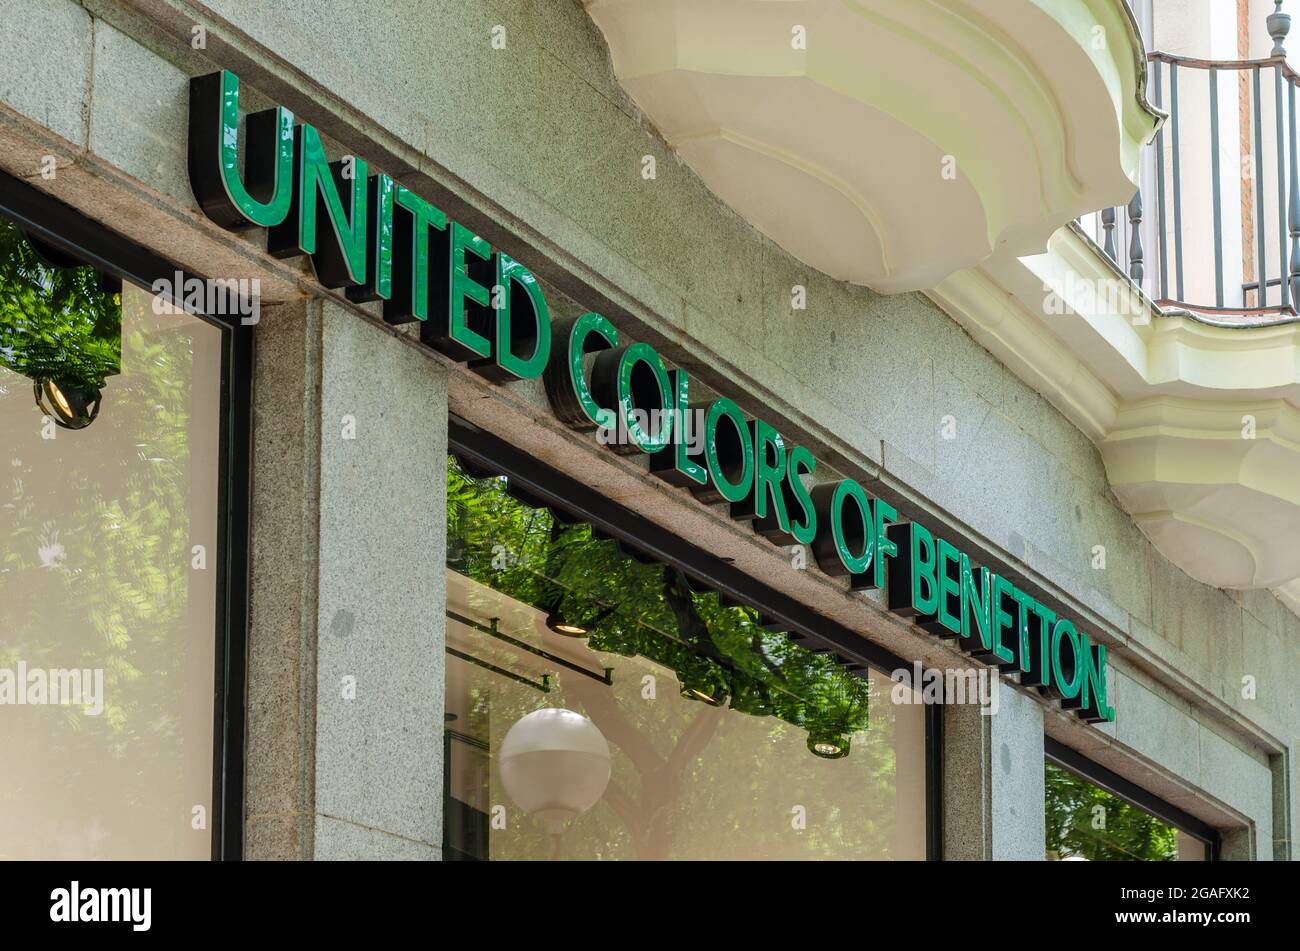 MADRID, SPAIN - JULY 23, 2021: Facade of United Colors of Benetton store in  Madrid, a global fashion brand based in Italy, founded in 1965 Stock Photo  - Alamy